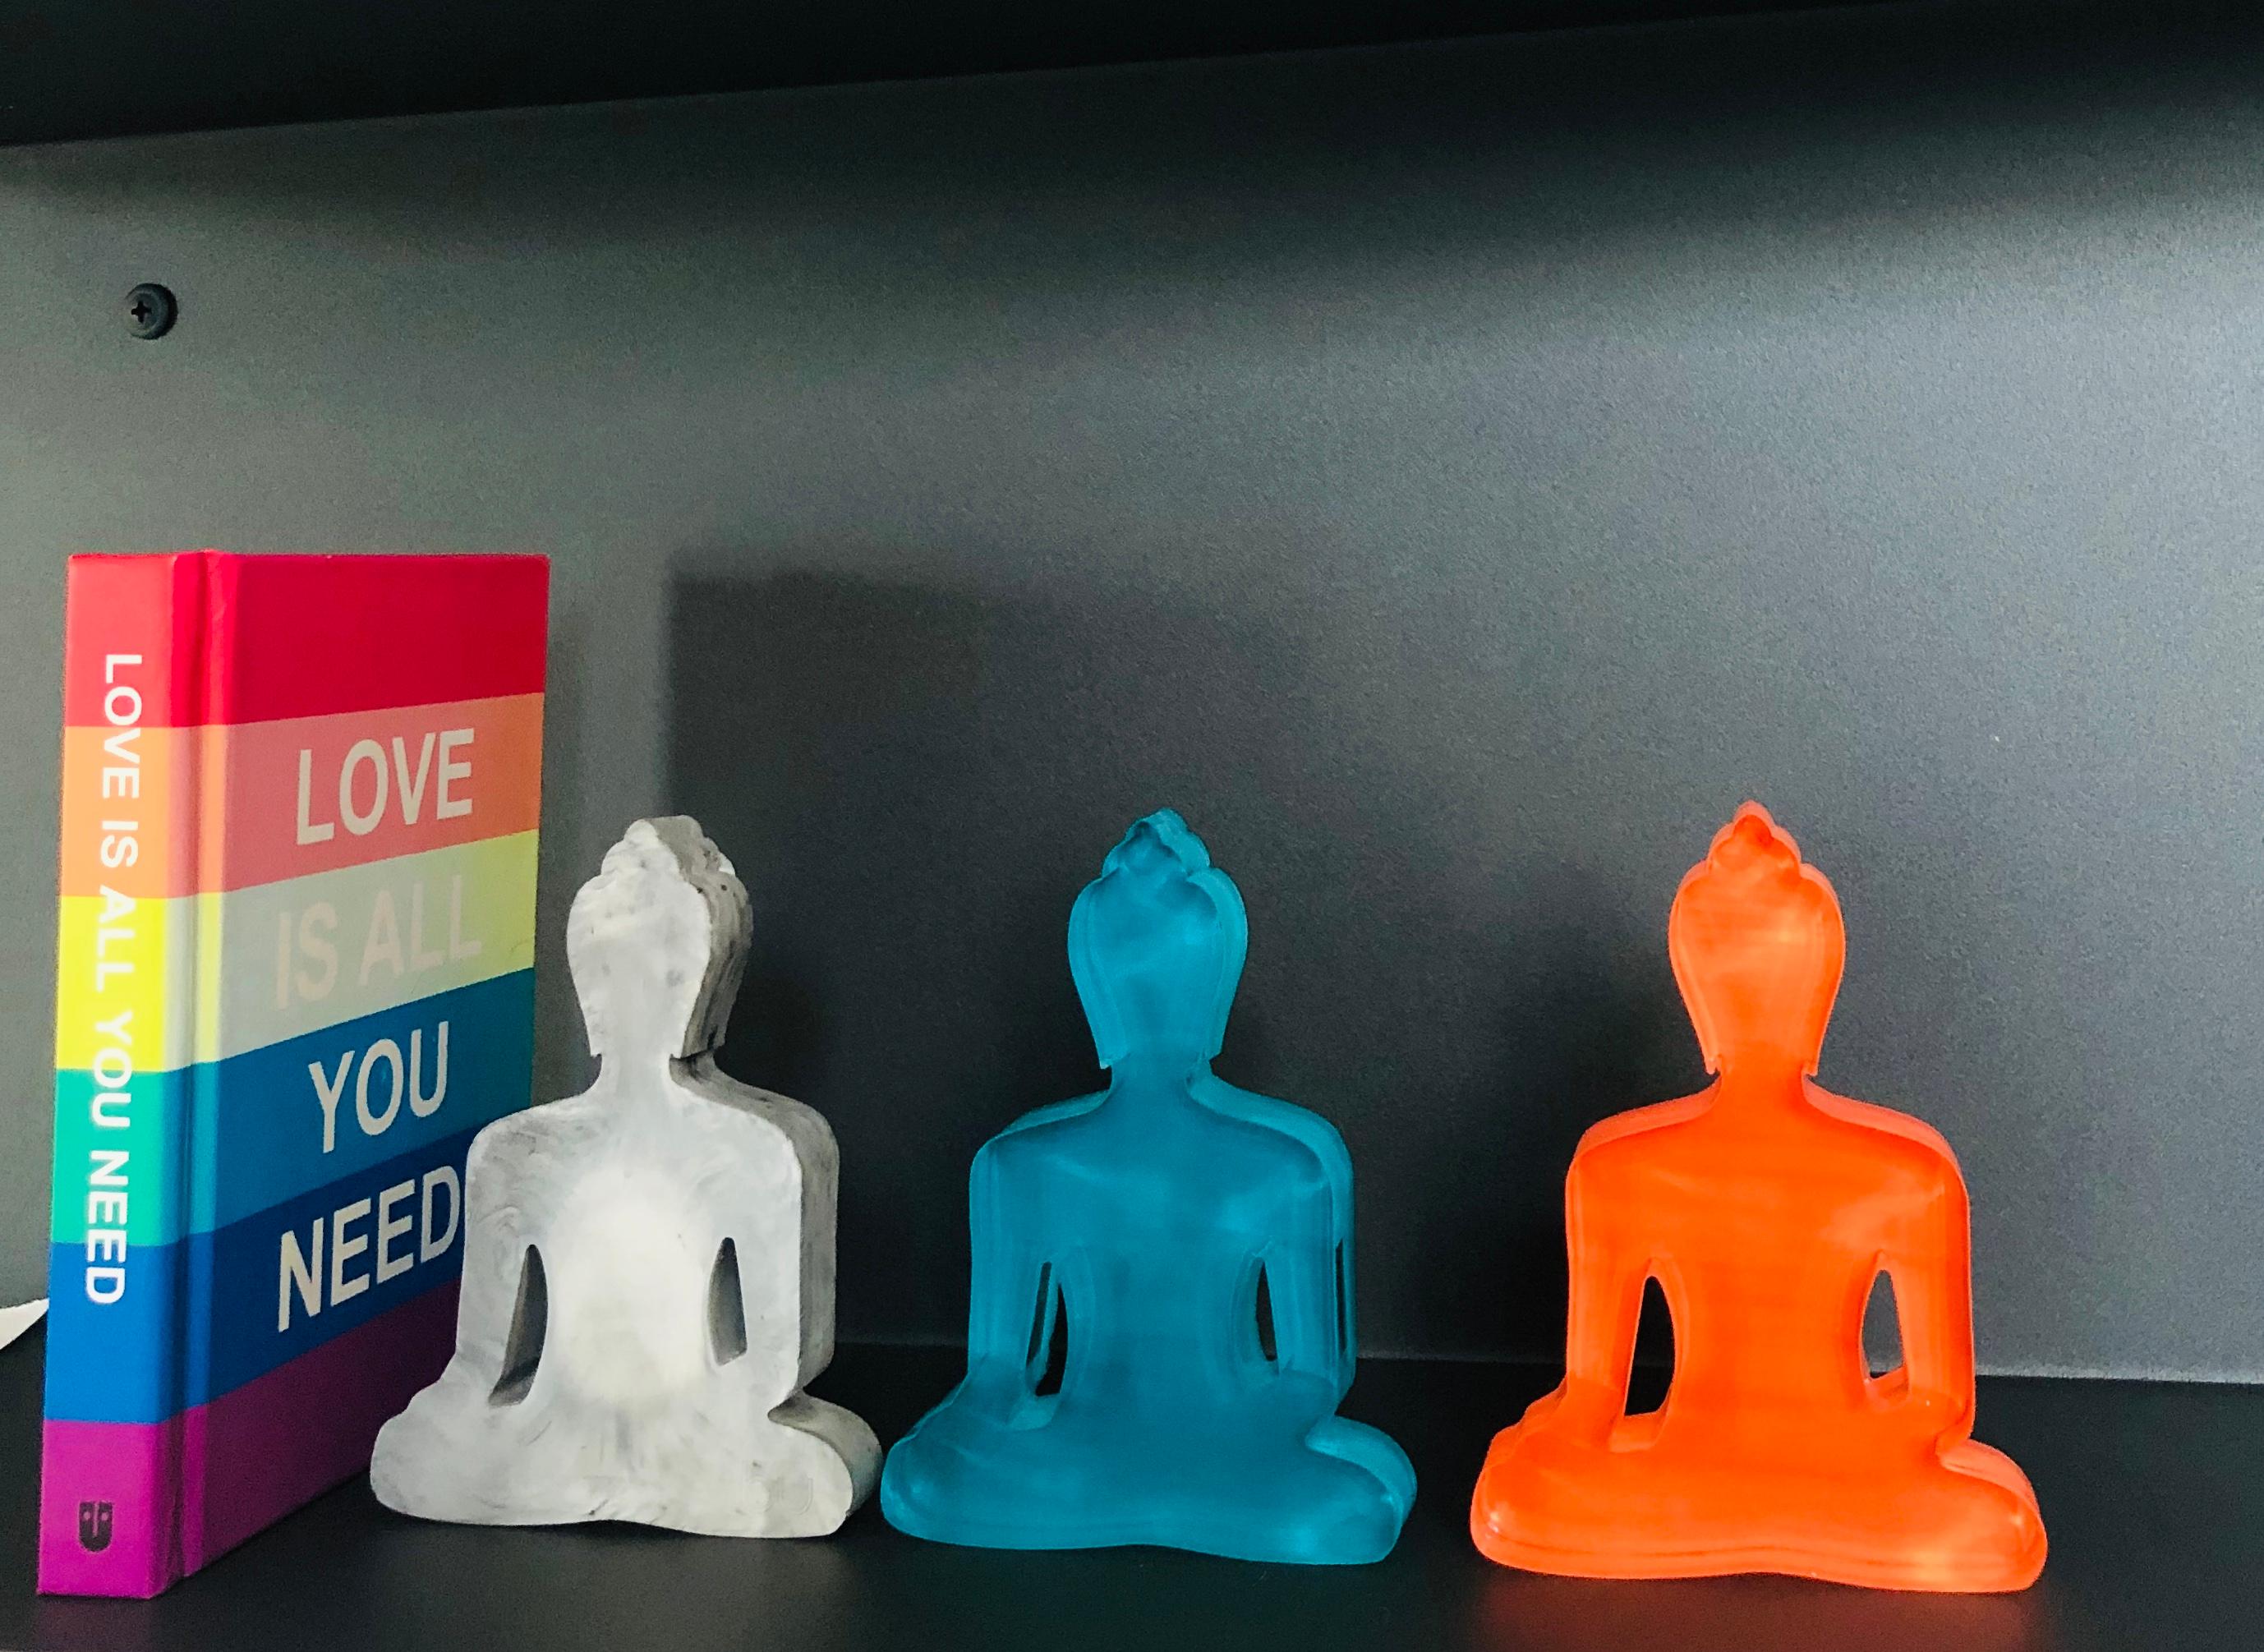 Buddha statues set of 3, hand painted plexiglass - Concrete, Turquoise, Orange - Sculpture by Tal Nehoray